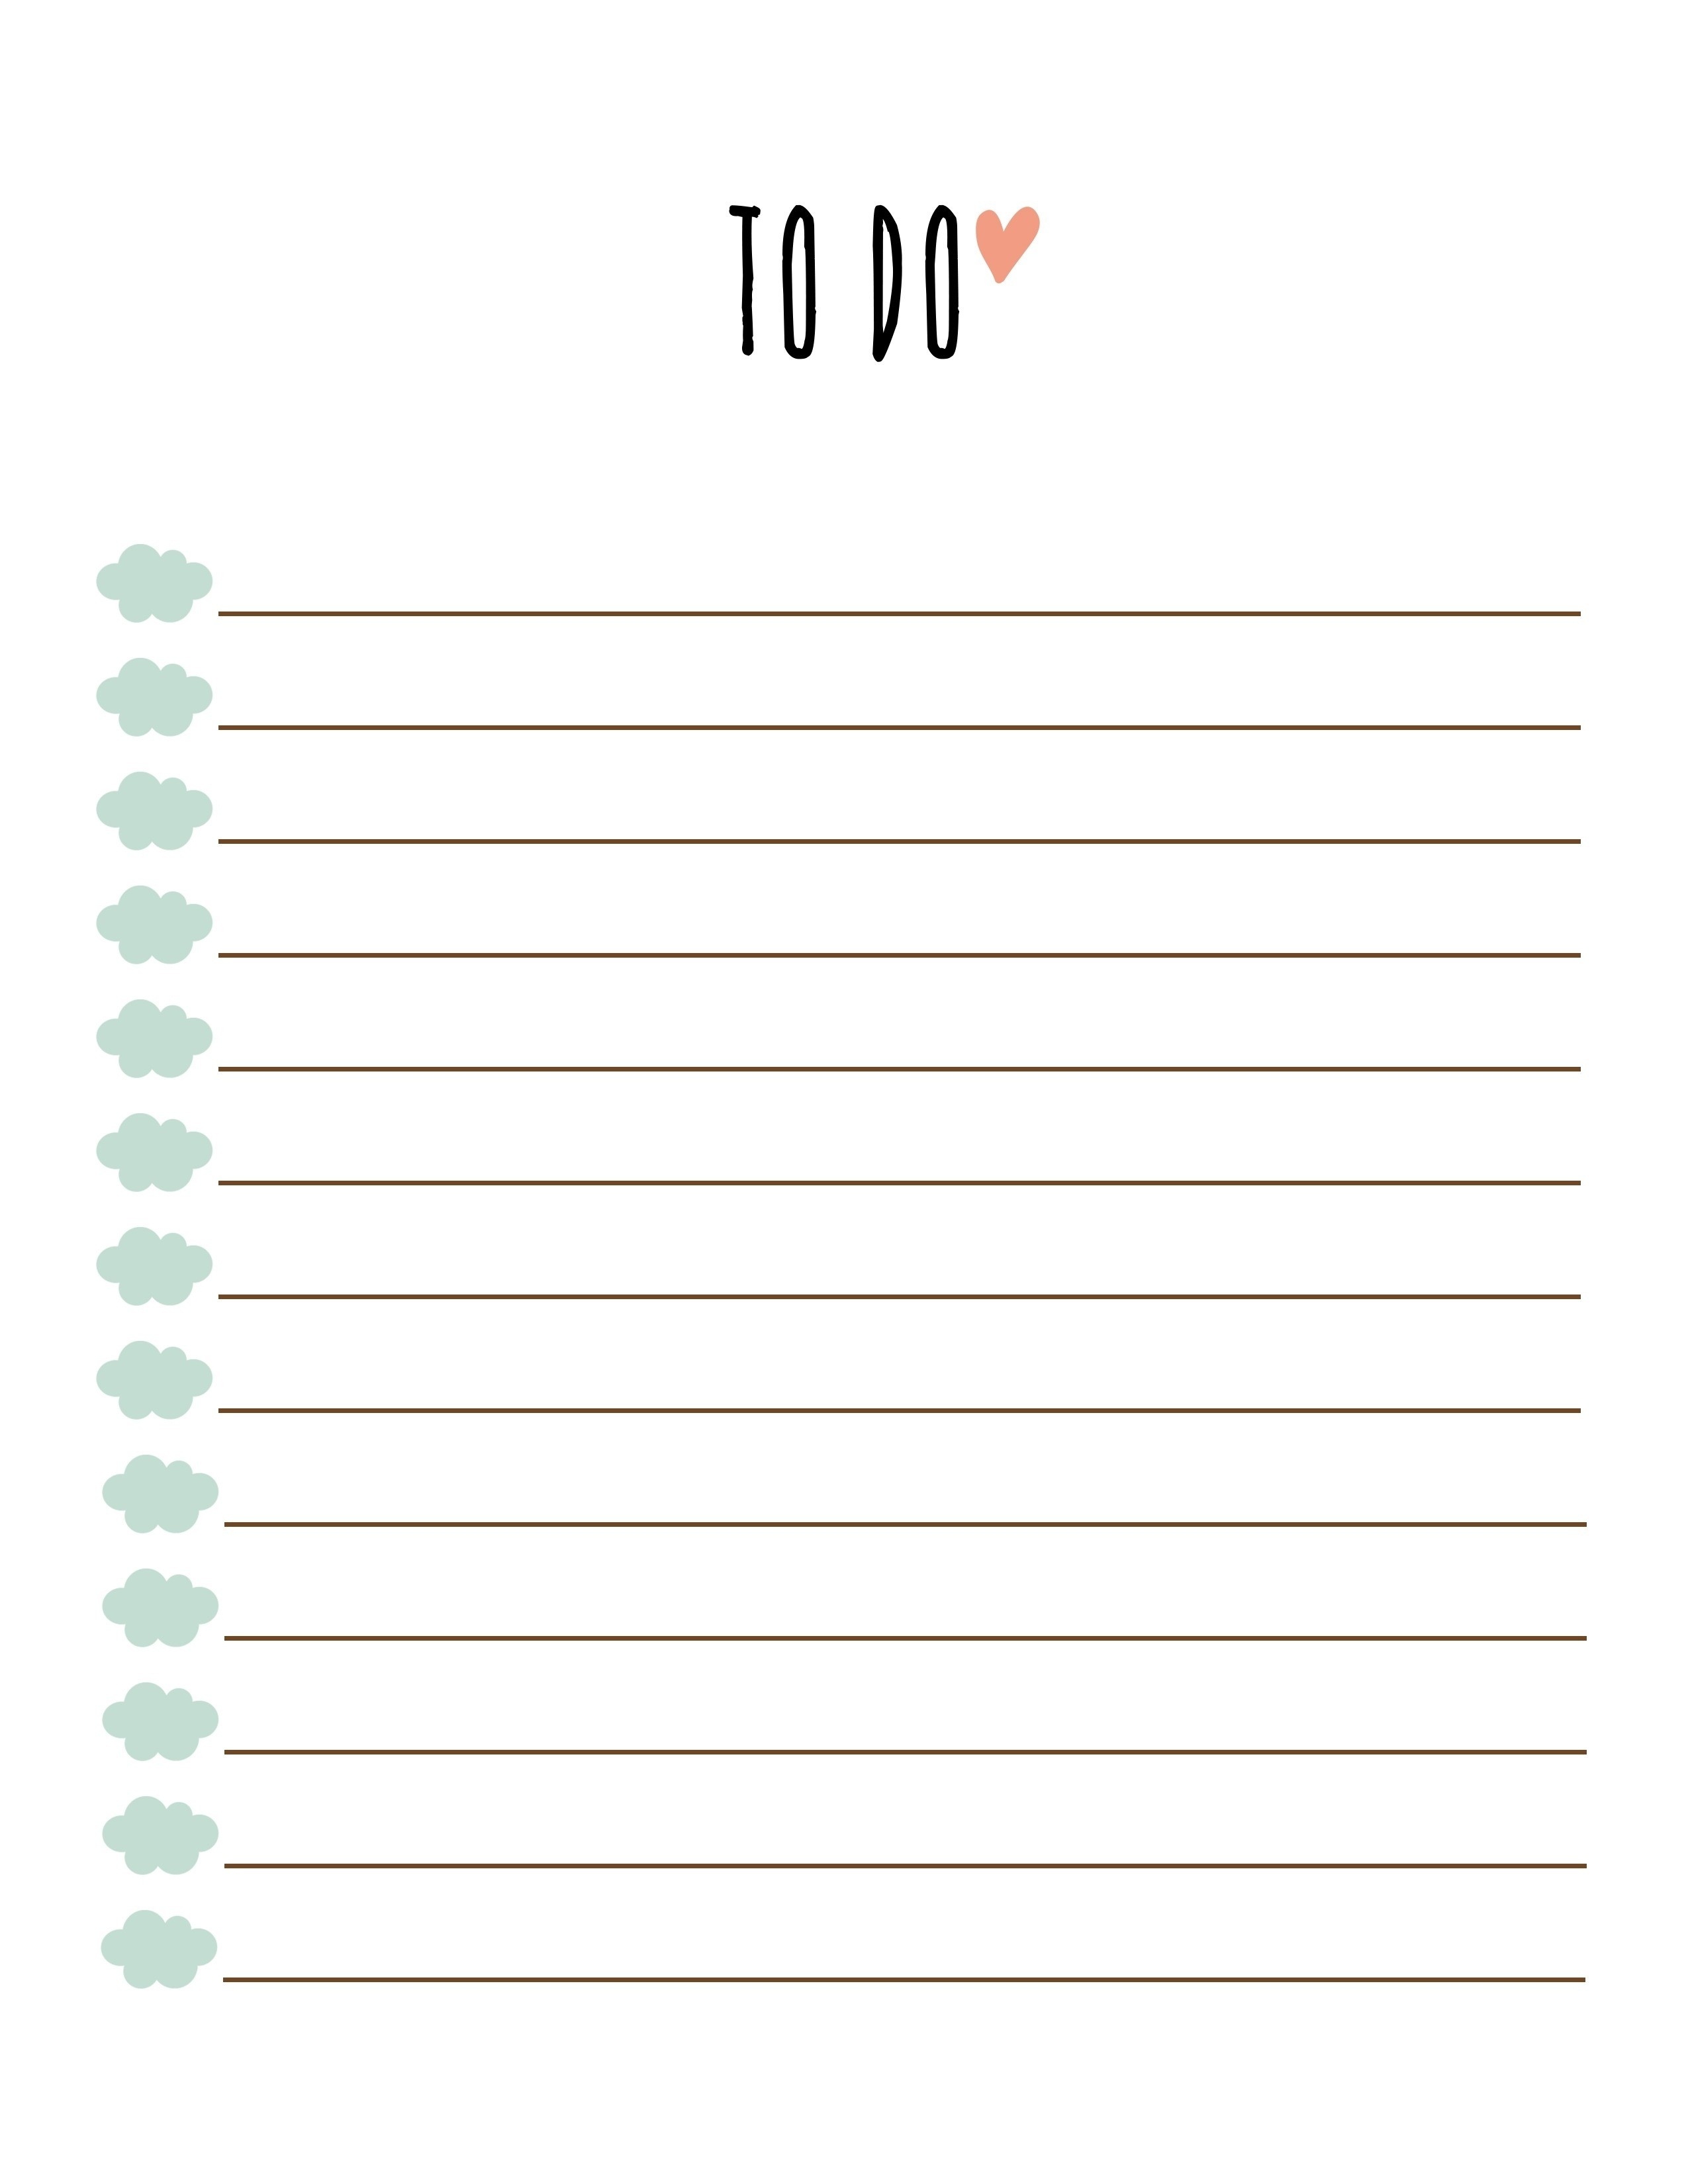 Free Printable To Do List Pdf | Examples And Forms - Free Printable To Do List Pdf